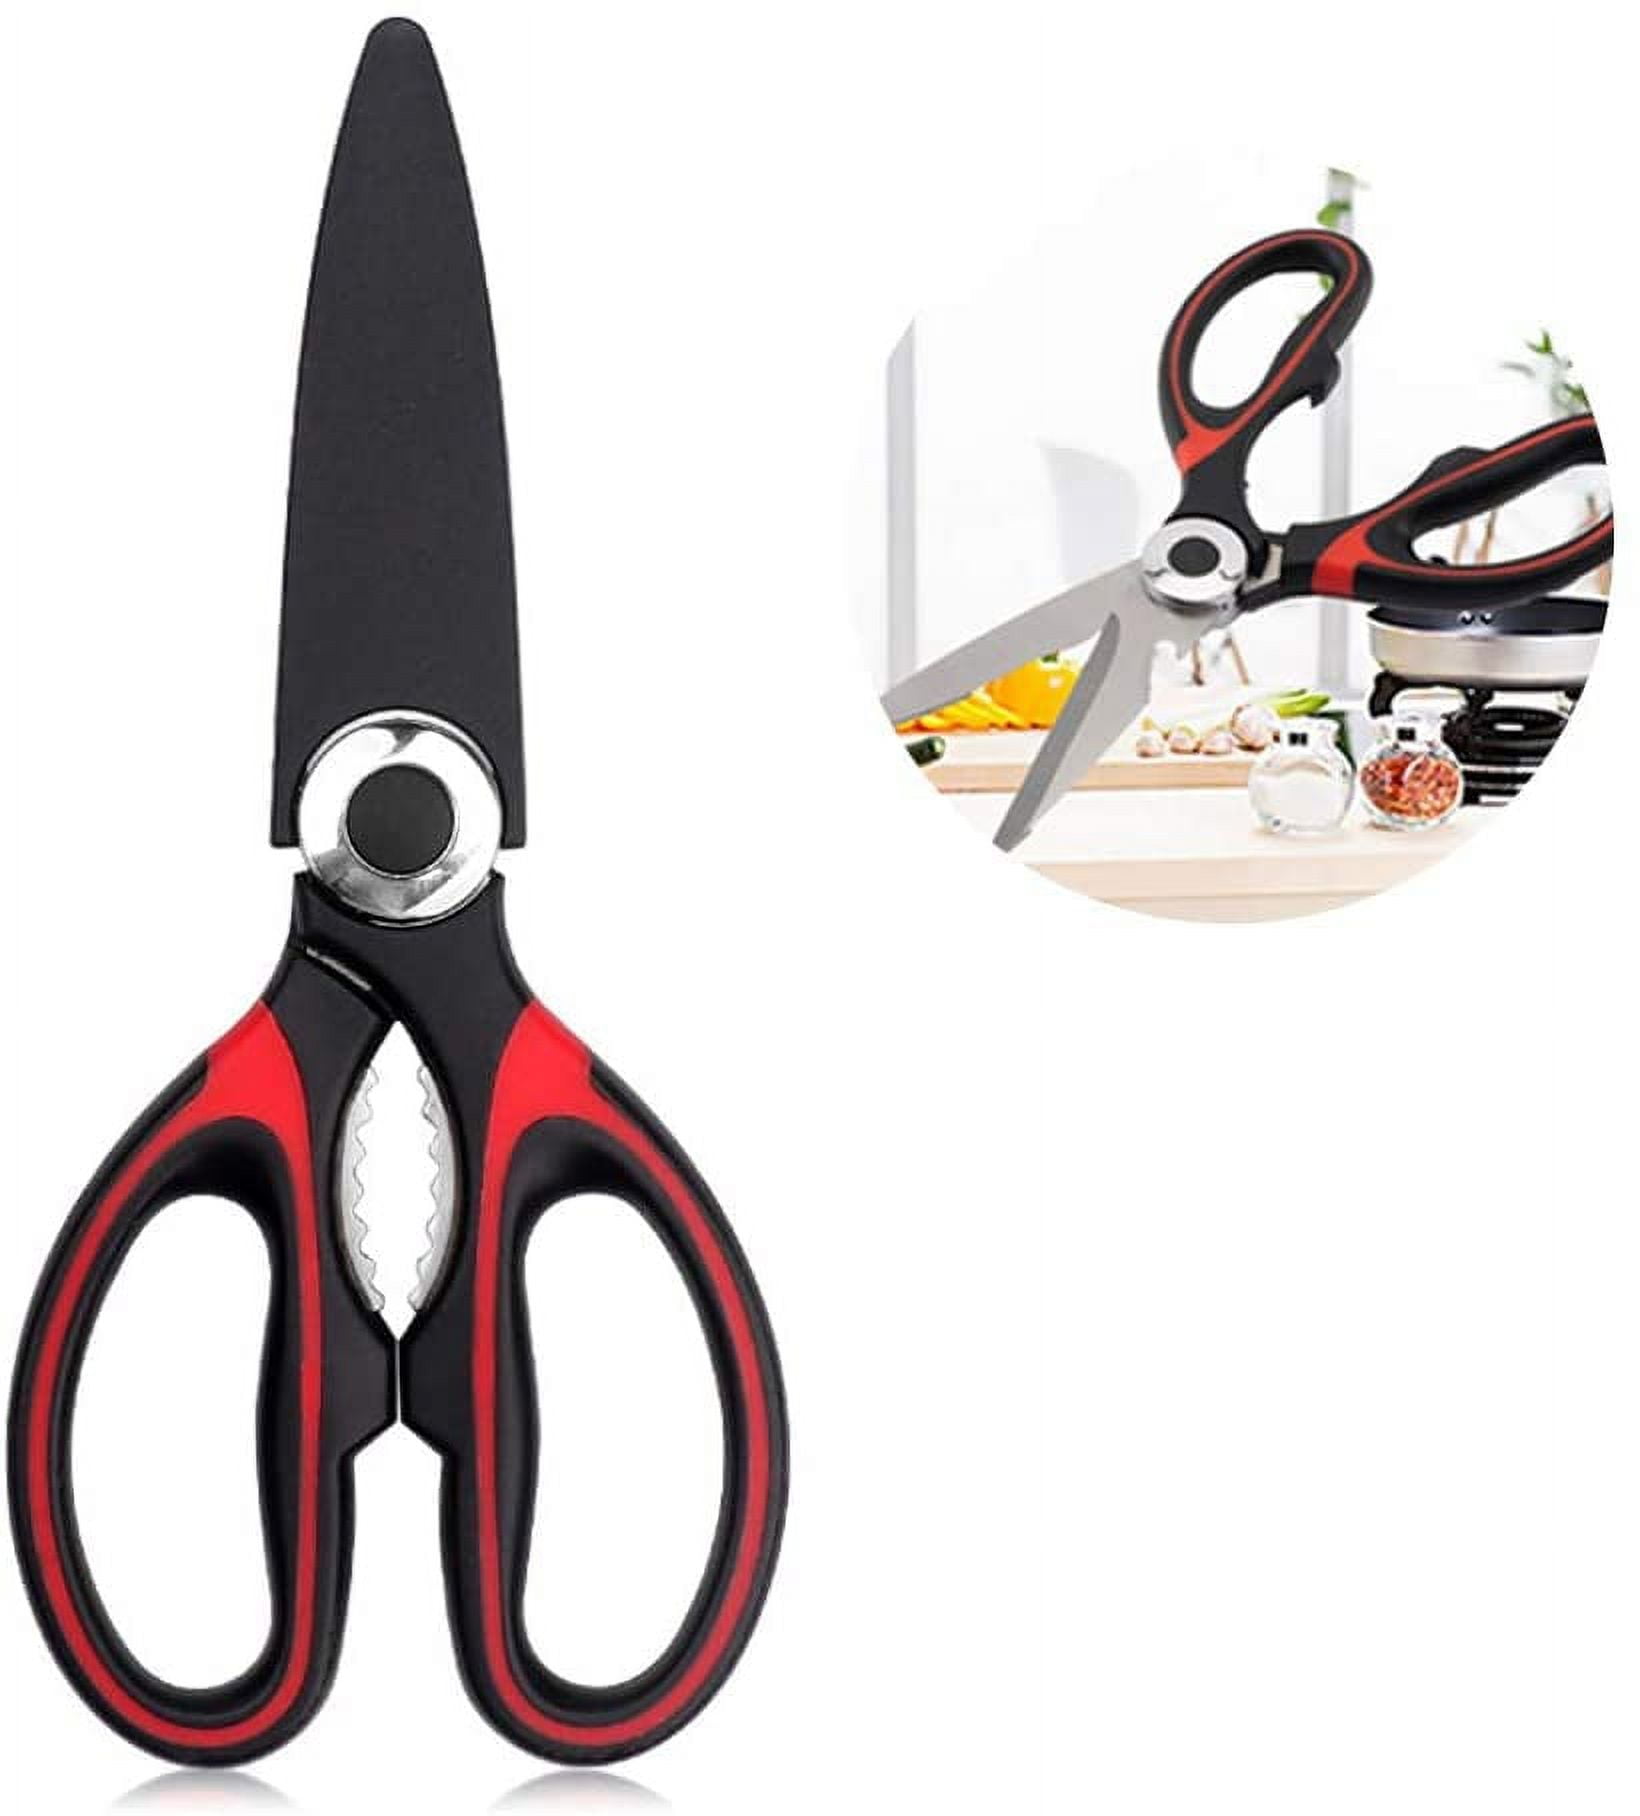 GAIFONGRE Heavy duty kitchen scissors 2-pack,High Stainless Steel sharp  blade,Dishwasher safe meat scissors Cooking shear for Chicken Fish Meat  Color